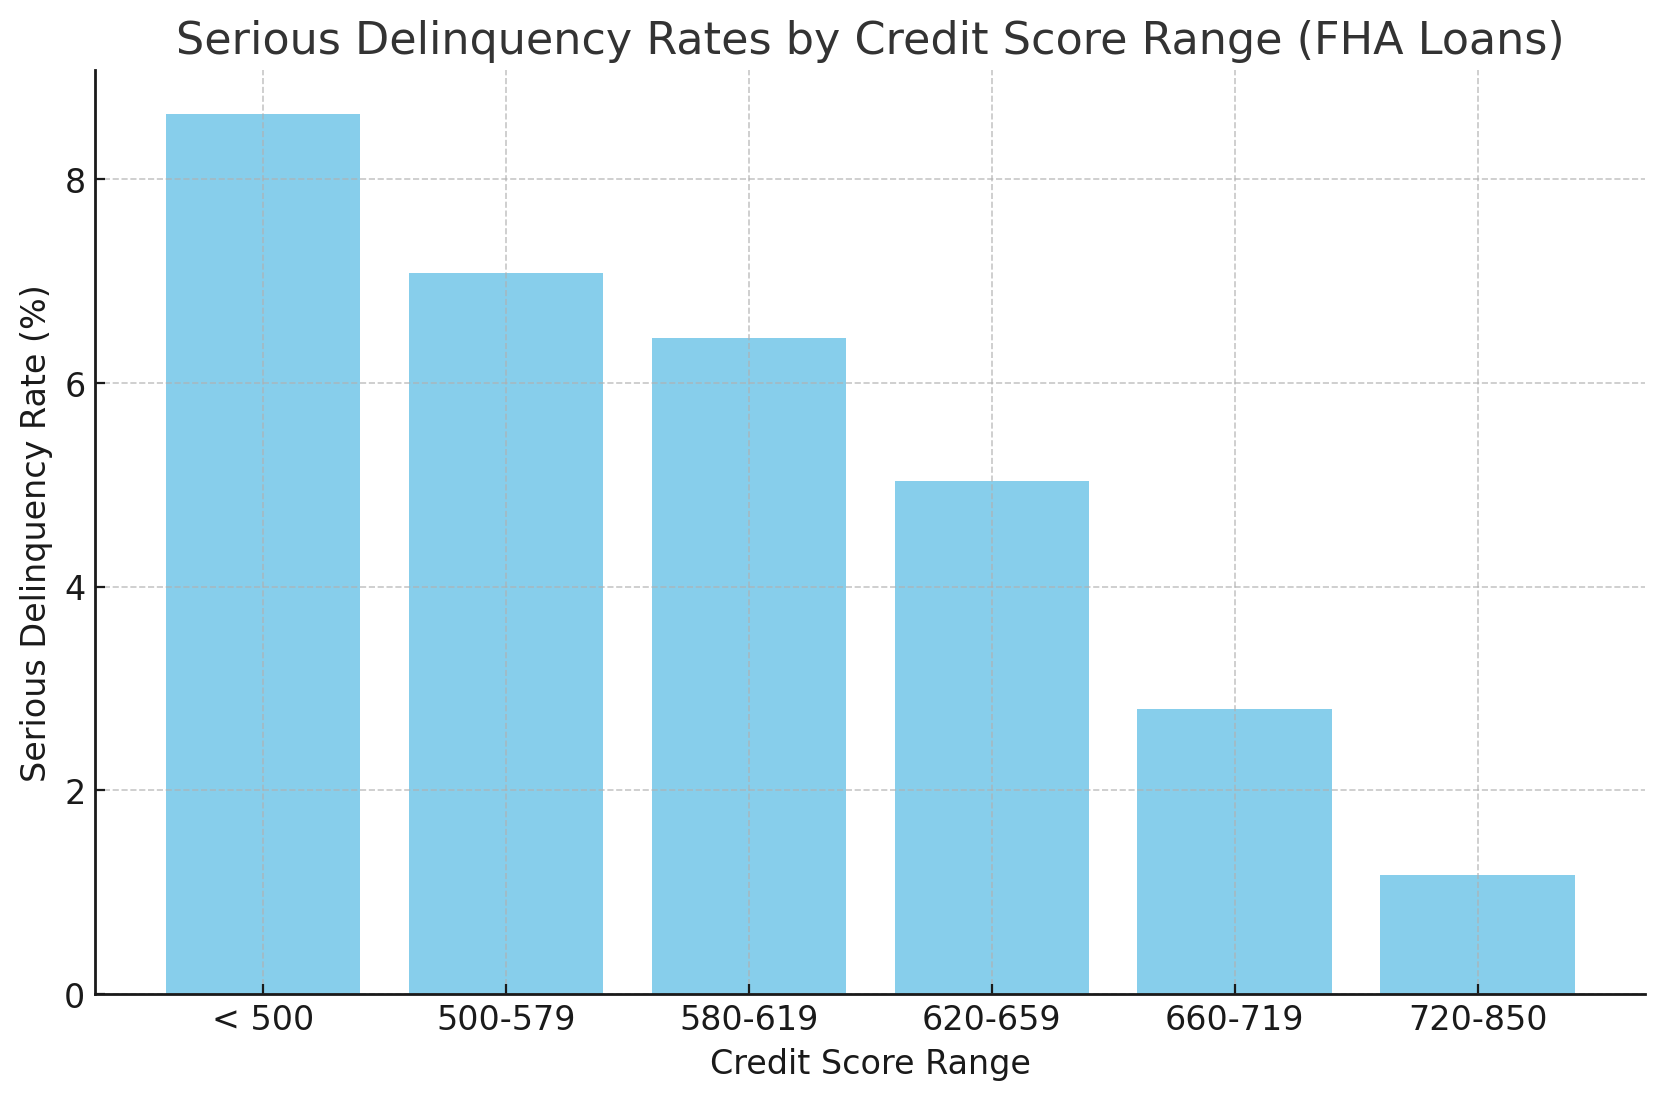 fha loans different credit score ranges and delinquency rates